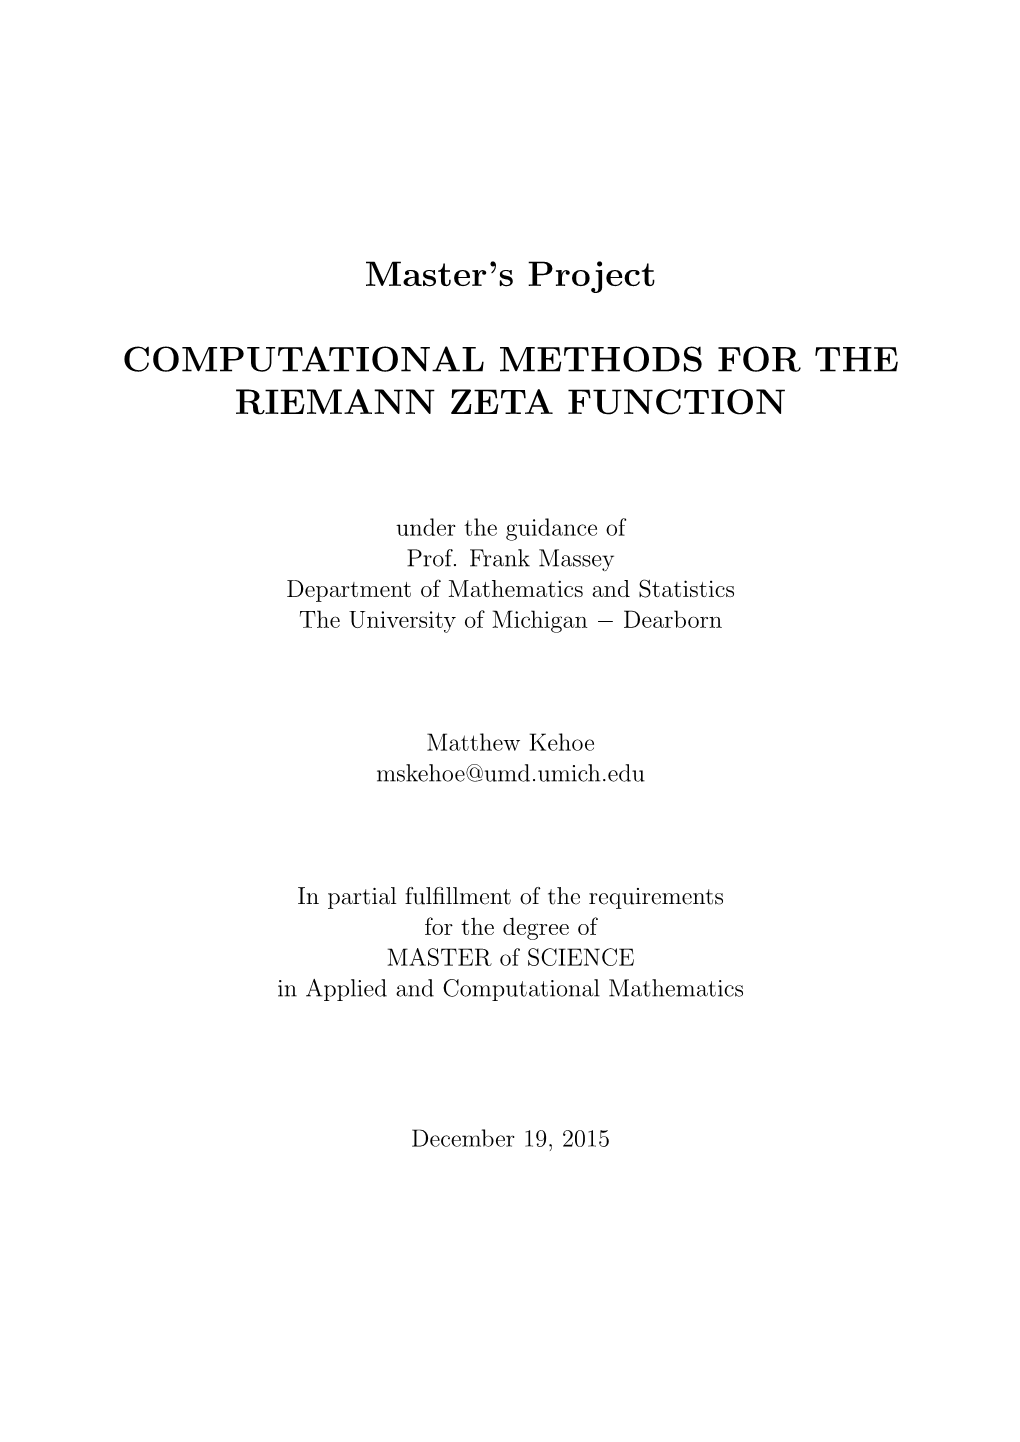 Master's Project COMPUTATIONAL METHODS for the RIEMANN